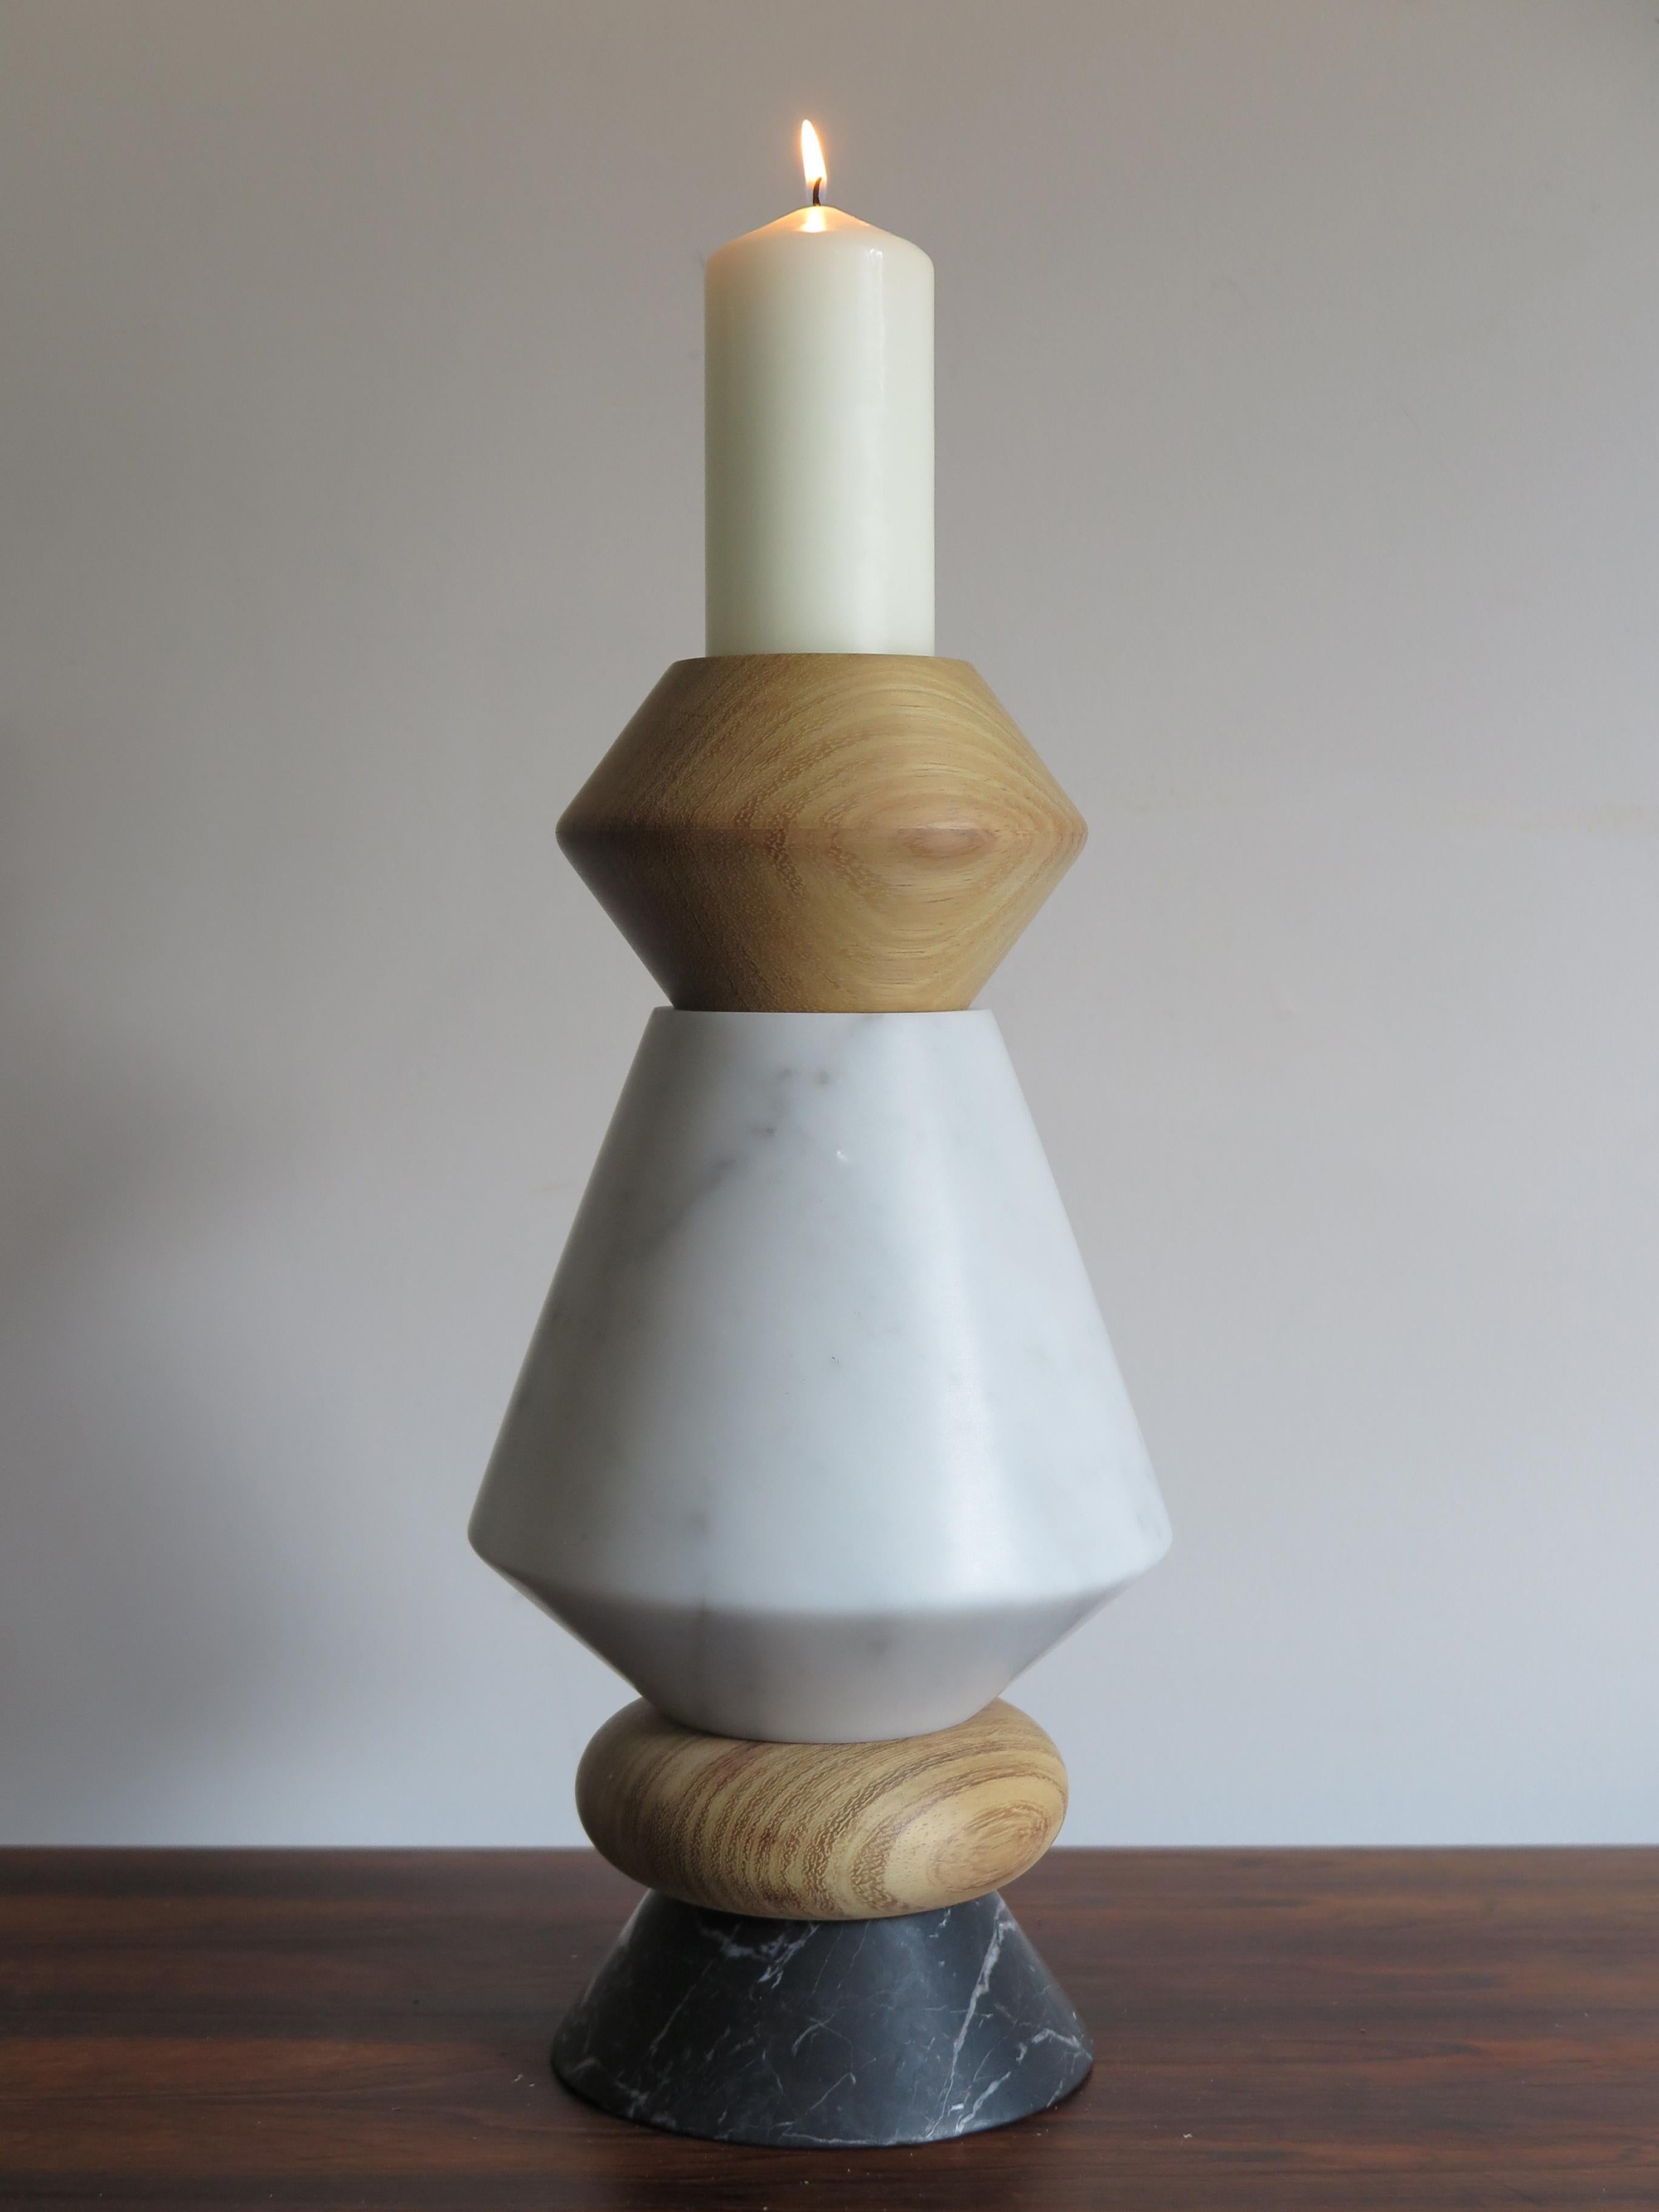 Italian Contemporary Marble and Wood Sculpture, Candle Holders, Flower Vase iTotem